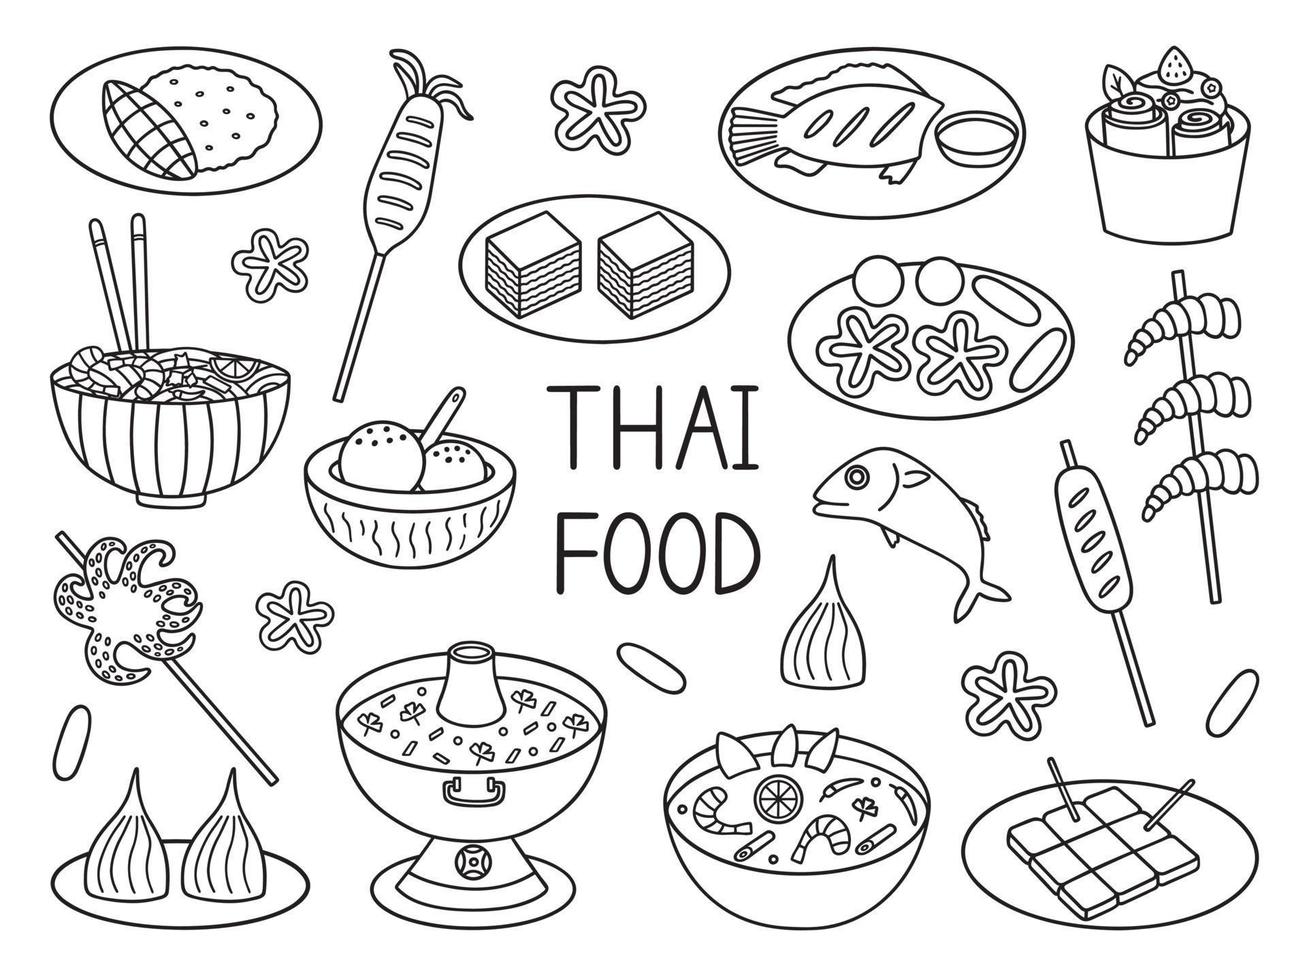 Thai food doodle set. Asian cuisine. Tom yum, fried ice cream, octopus in sketch style. Hand drawn vector illustration isolated on white background